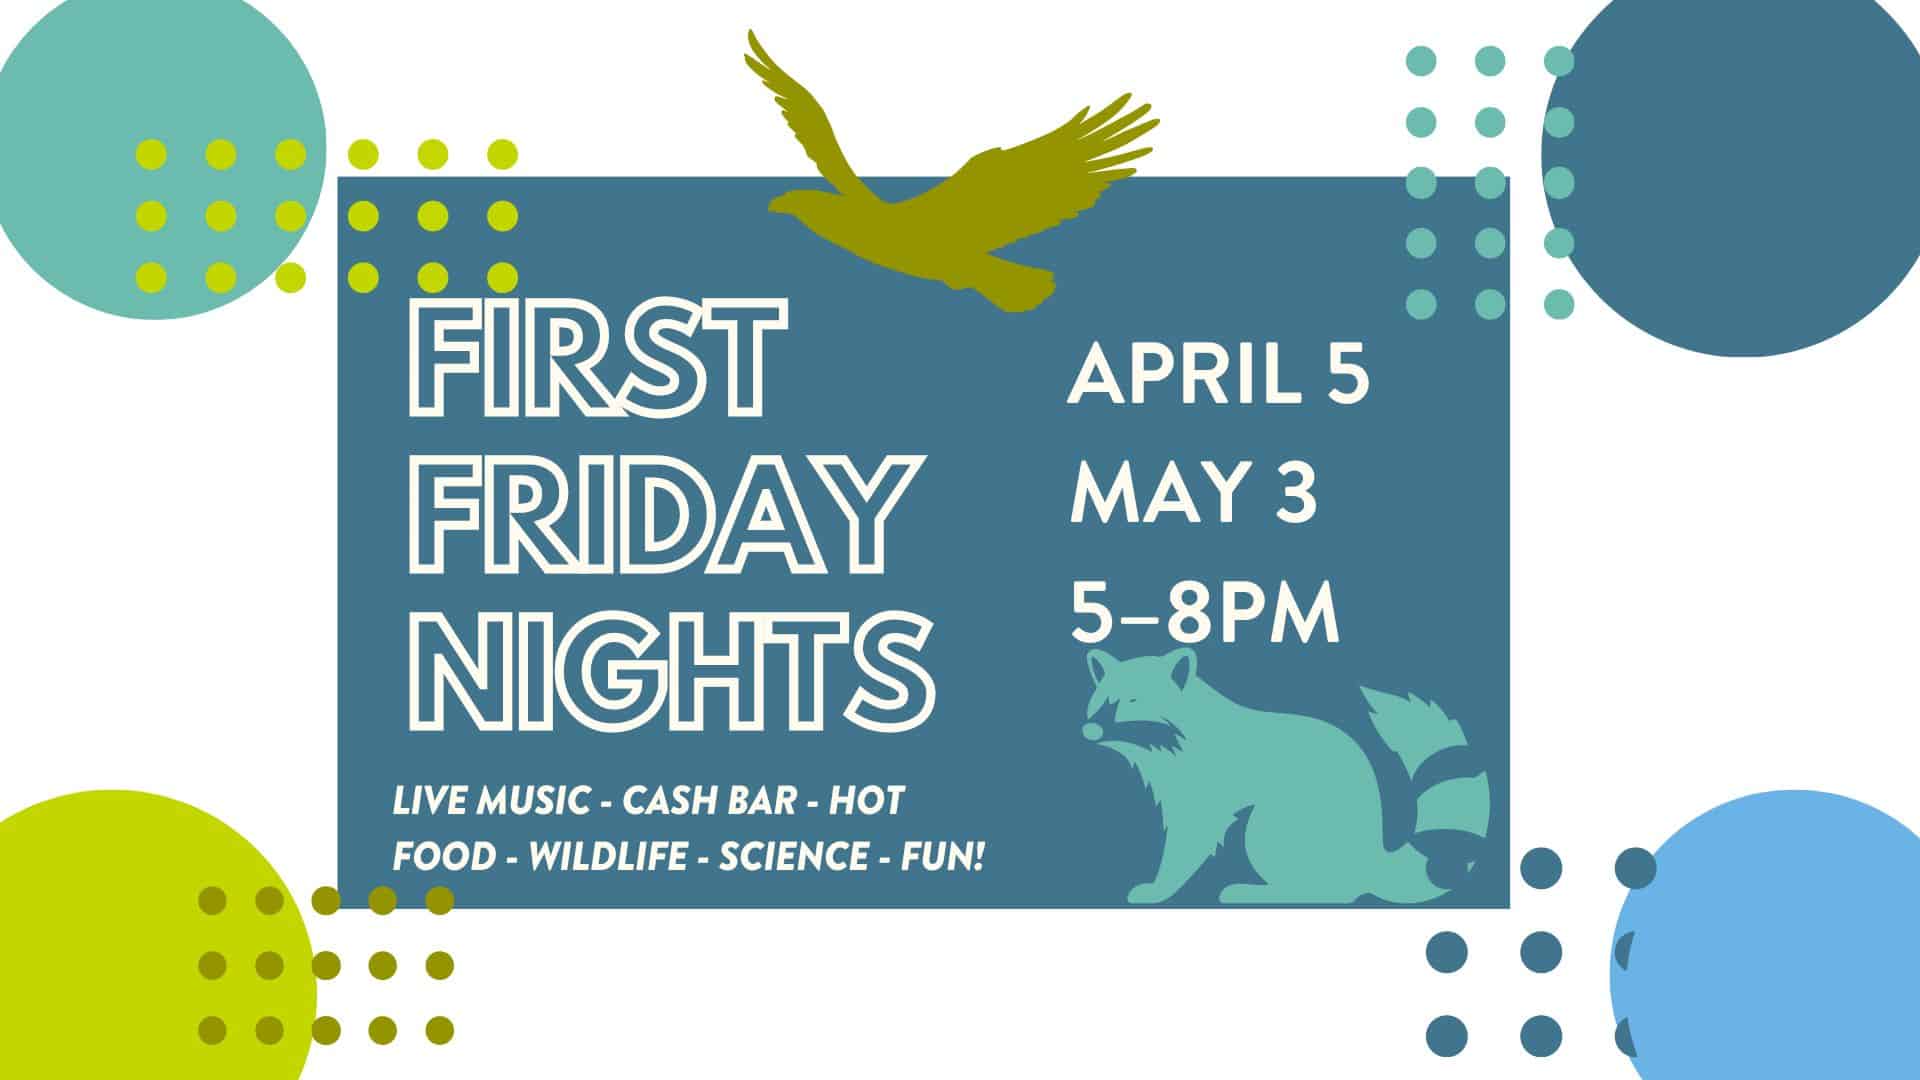 First Friday Nights. April 5 and May 3, 5 to 8 PM